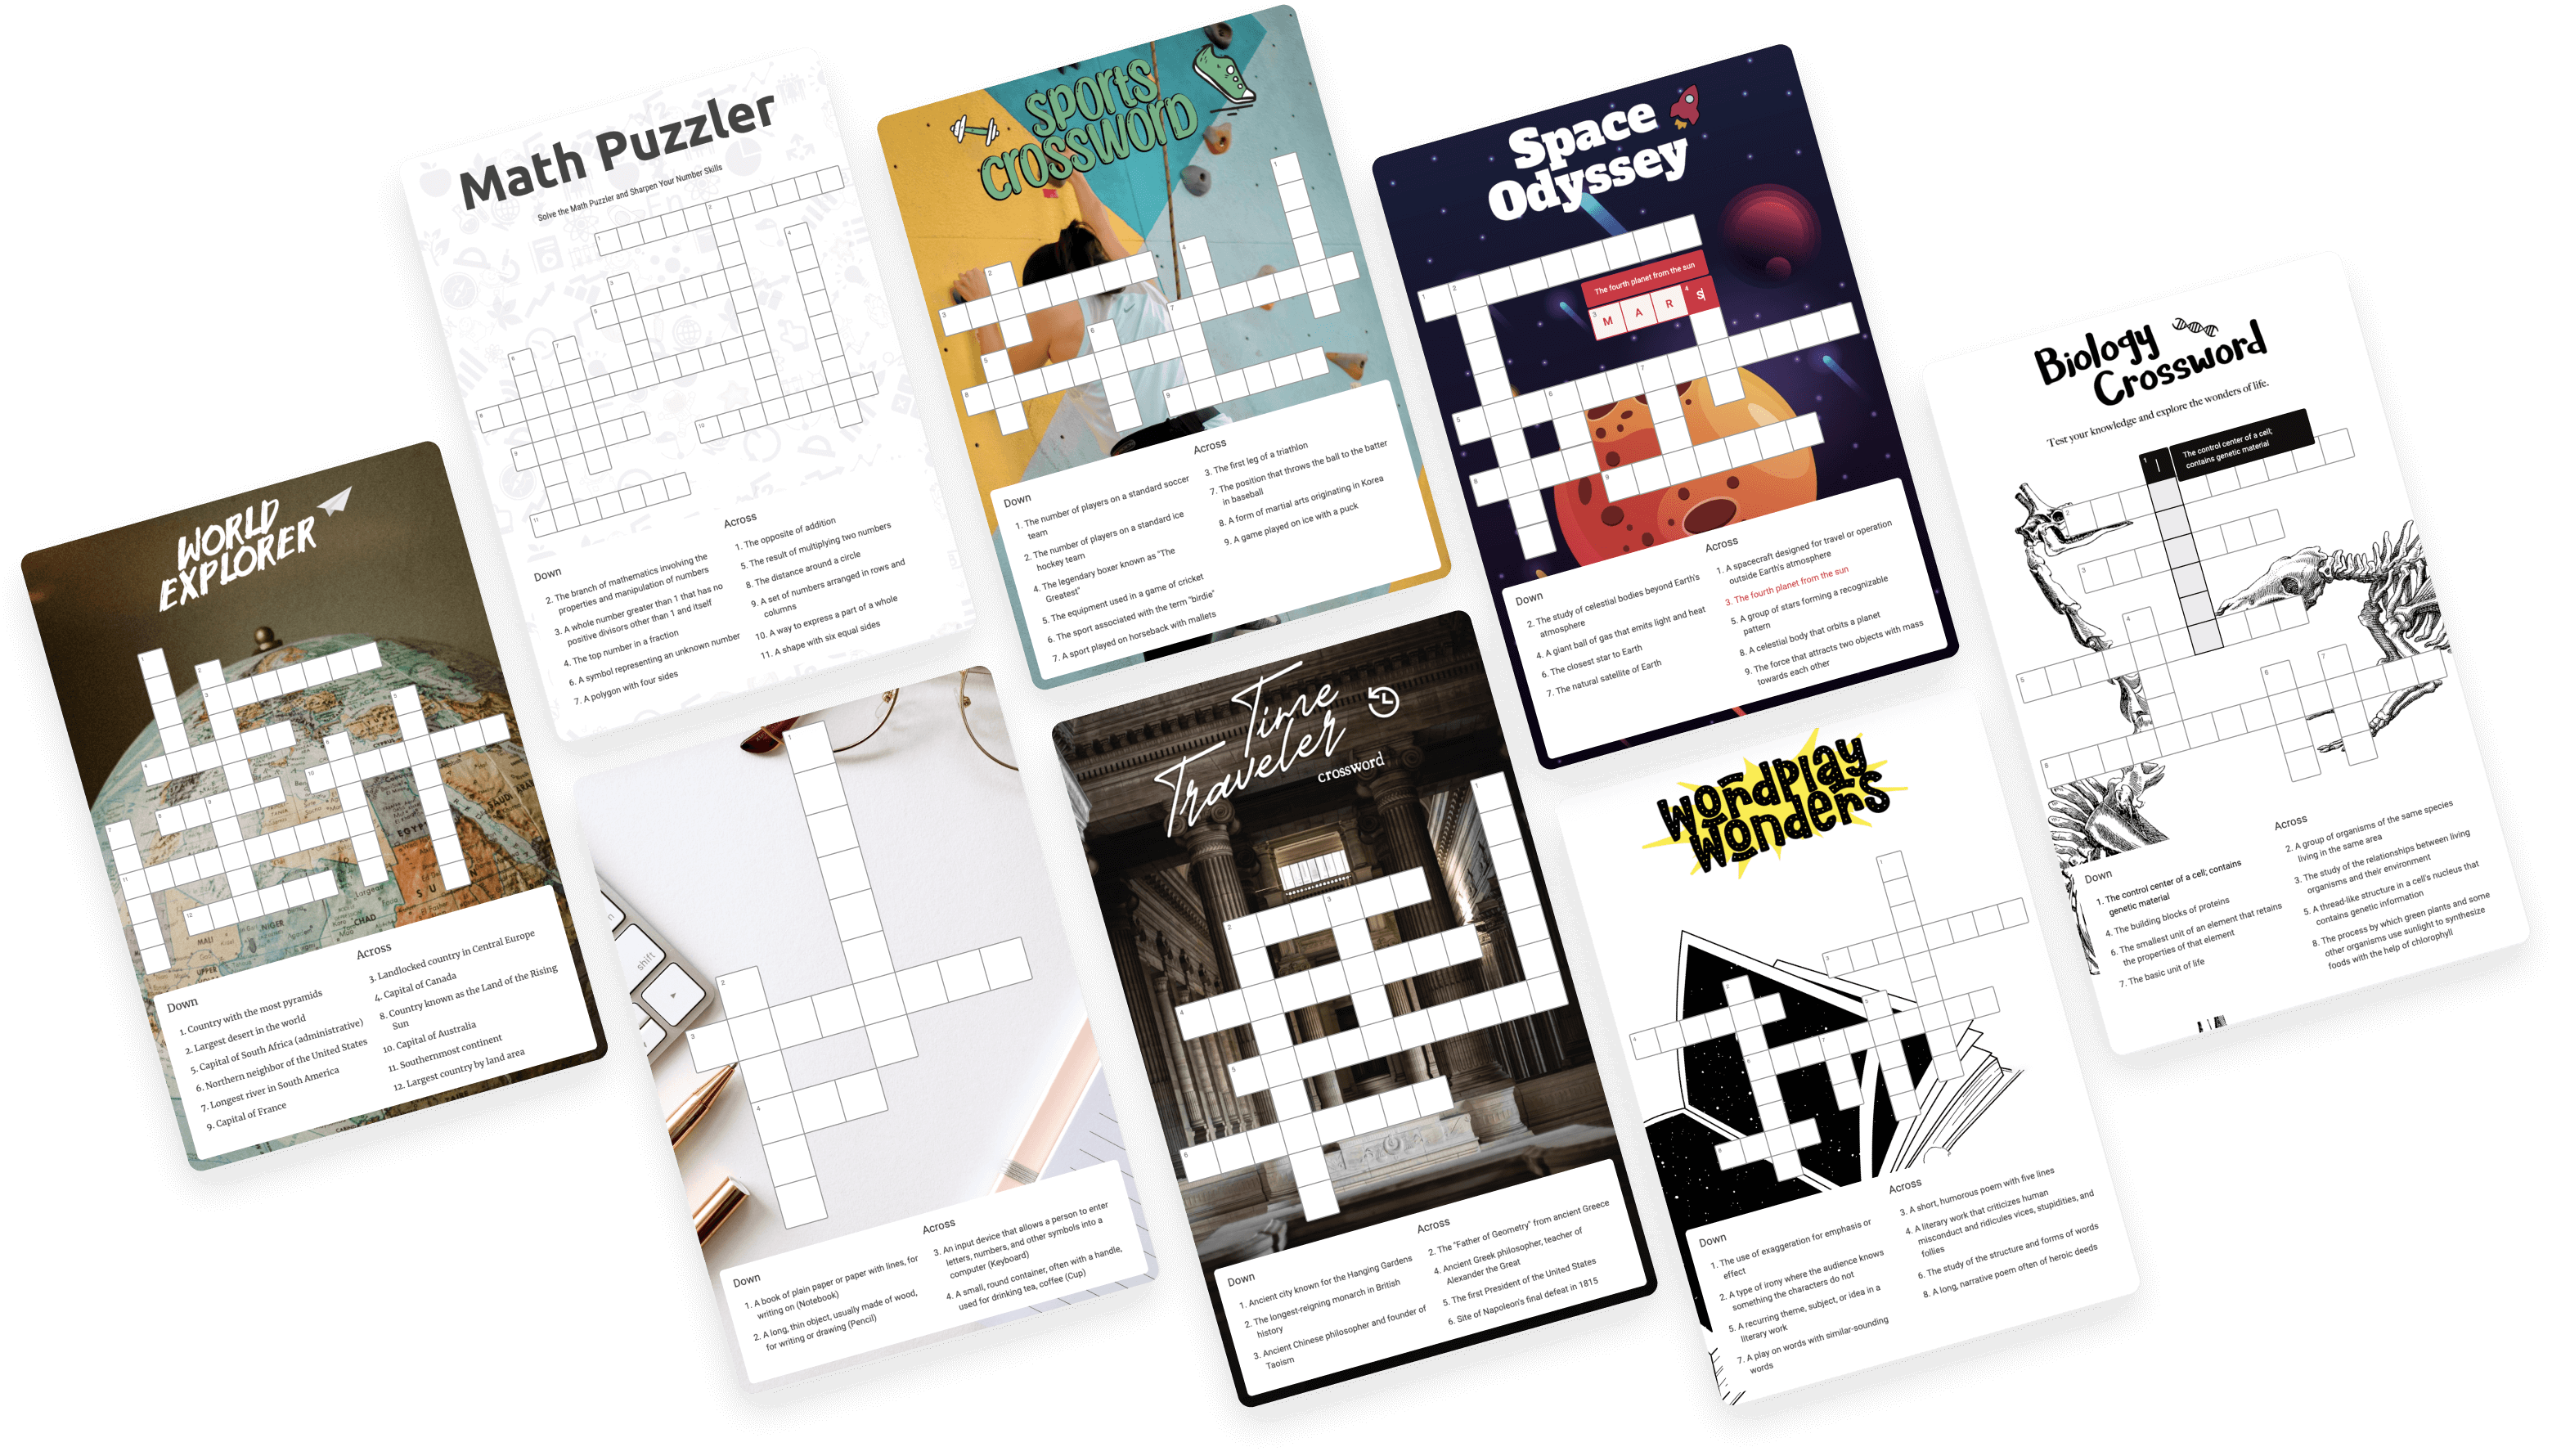 Posters with Interacty projects based on mechanics "Crucigrama"